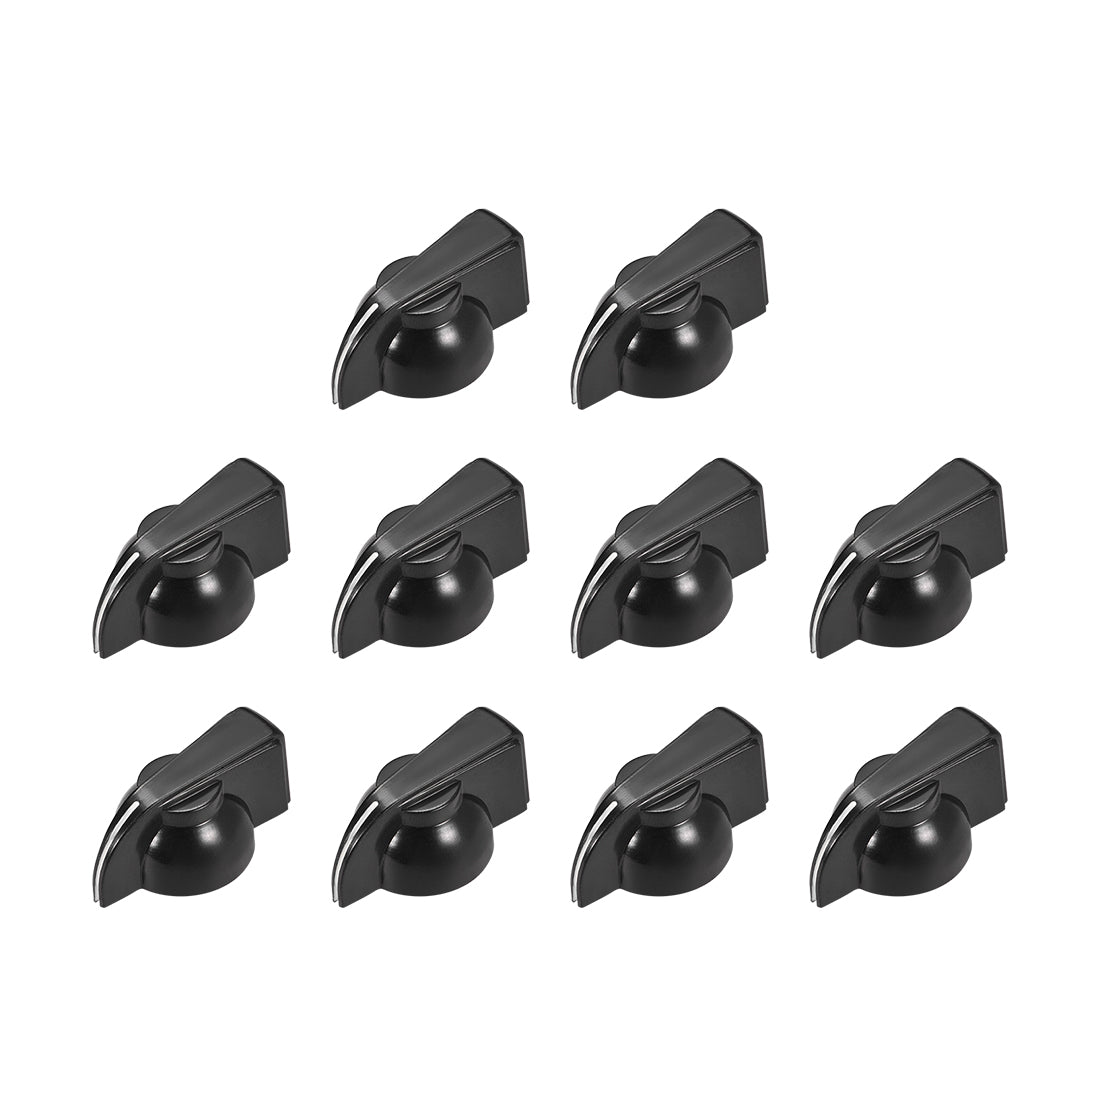 uxcell Uxcell 10pcs 6mm Potentiometer Control Knobs For Guitar Acrylic Volume Tone Knob Black